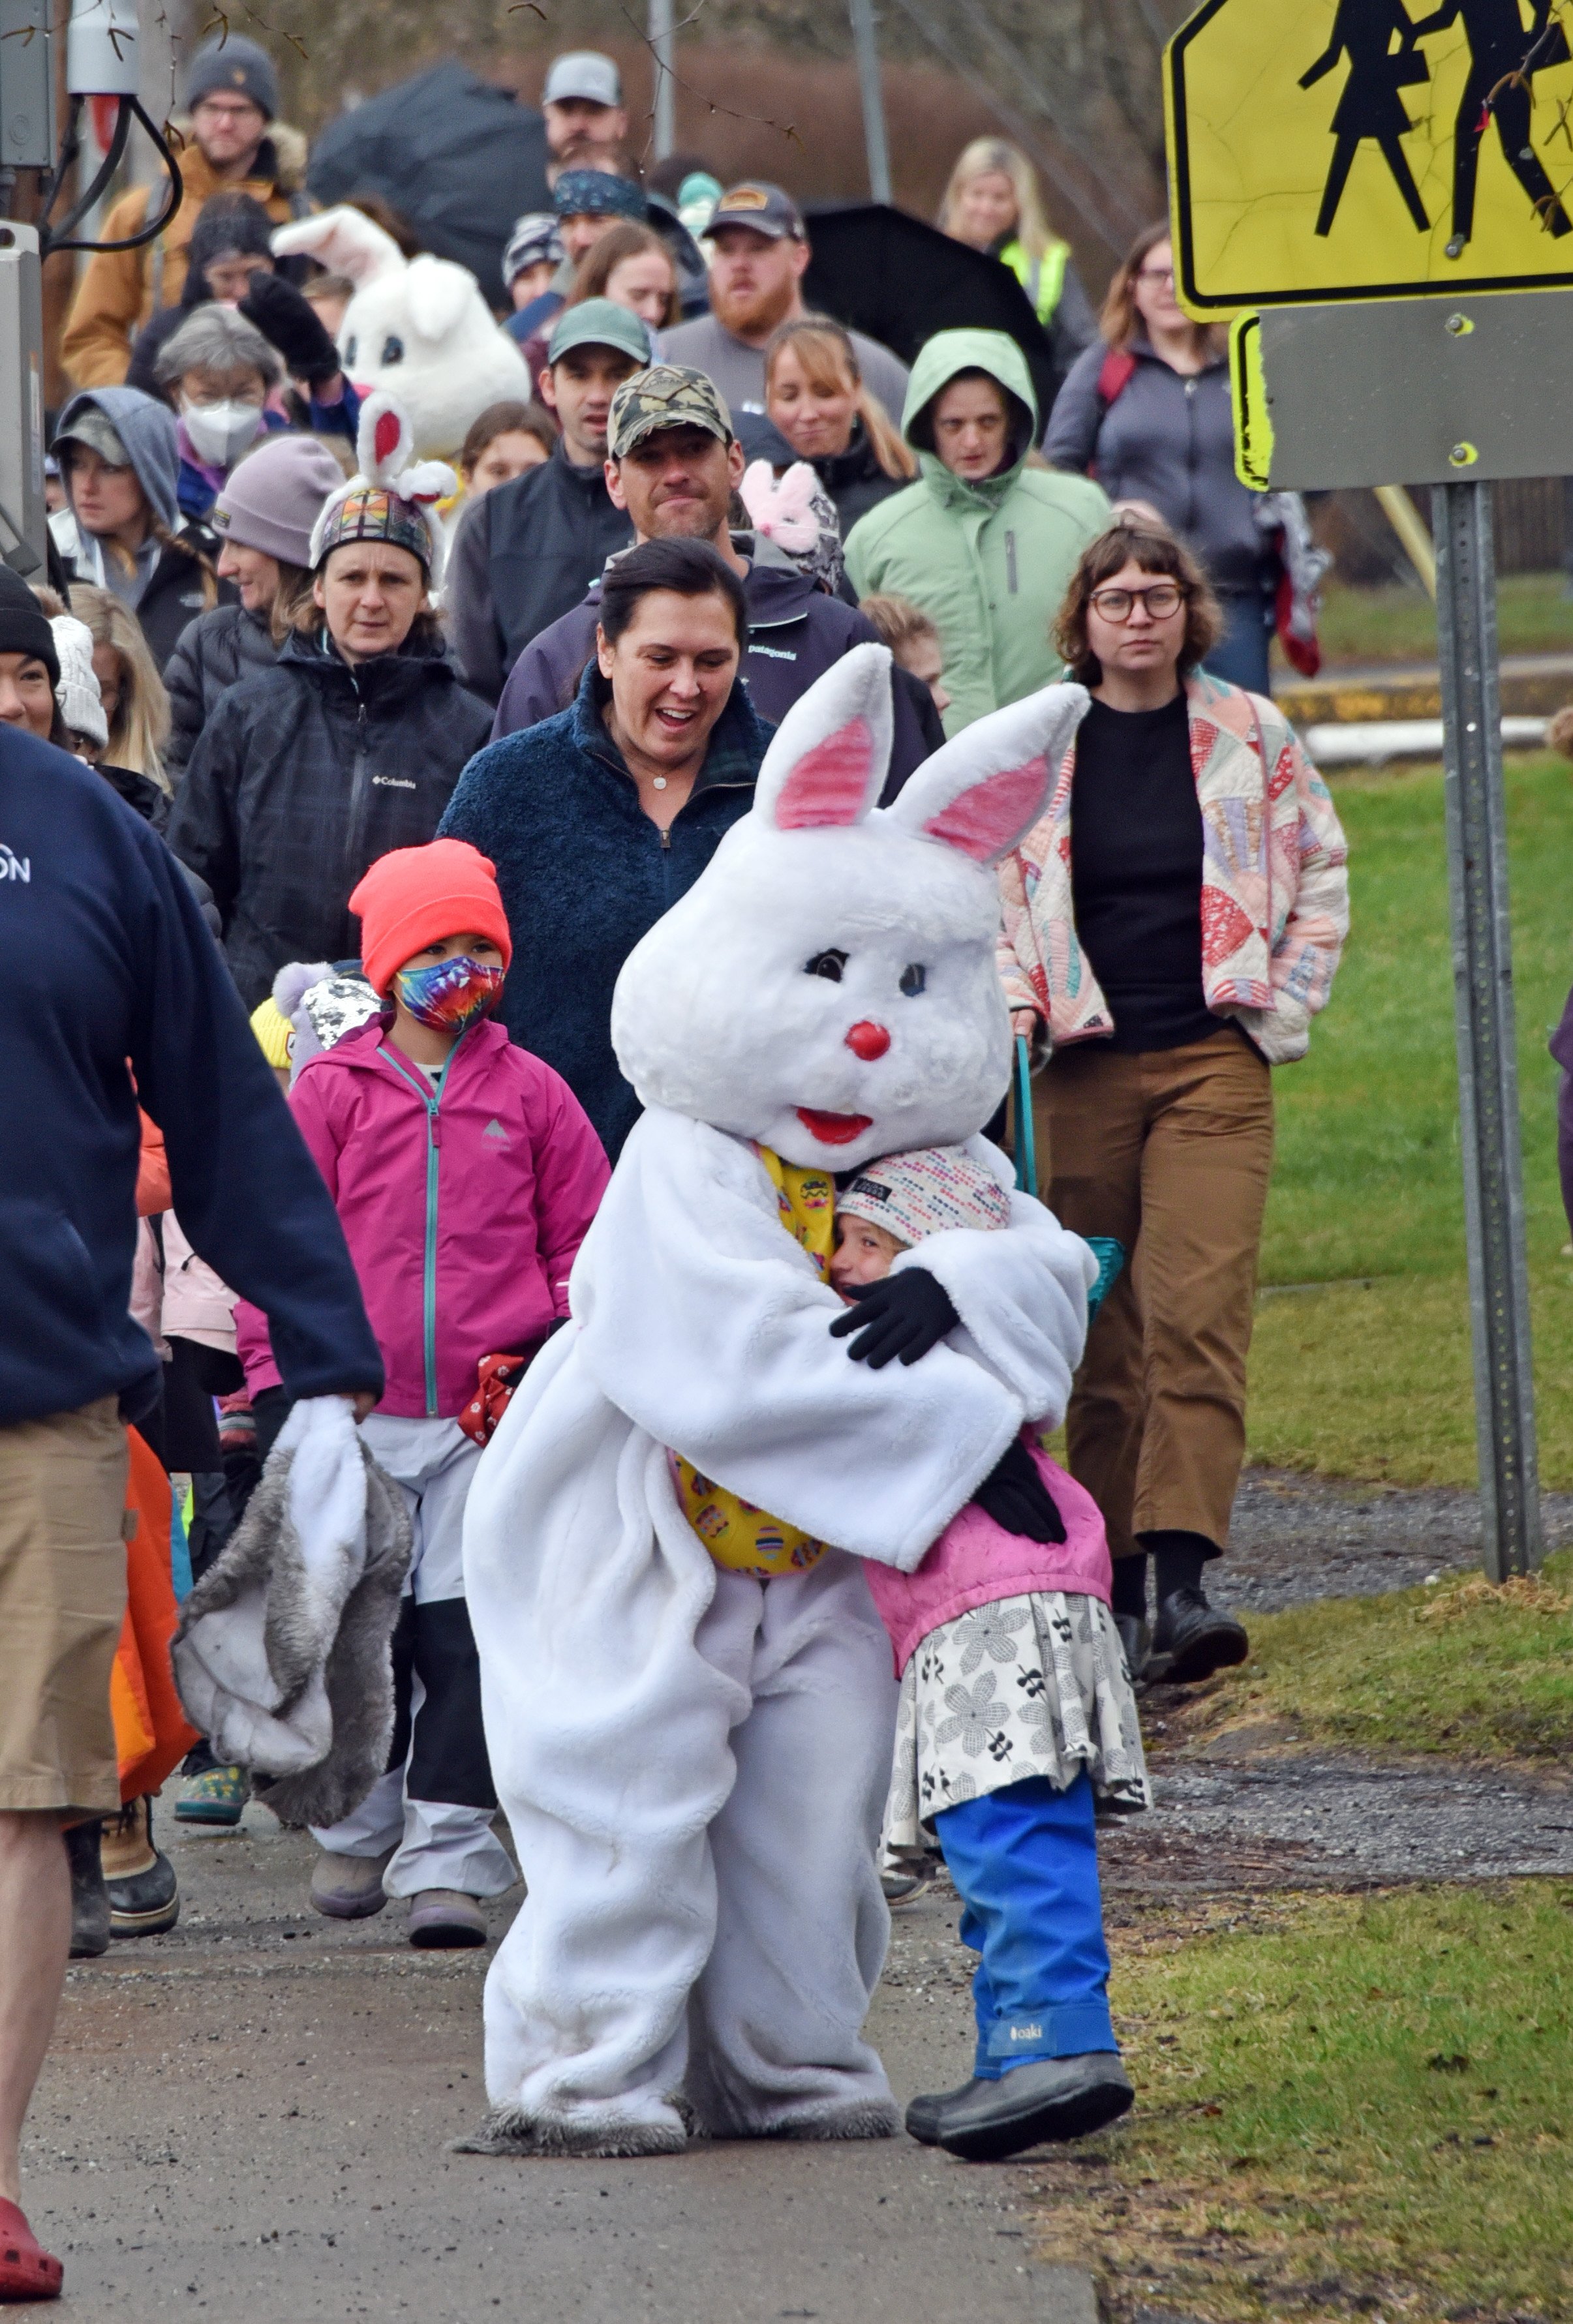  The Easter Bunny makes friends along the way. Photo by Gordon Miller 